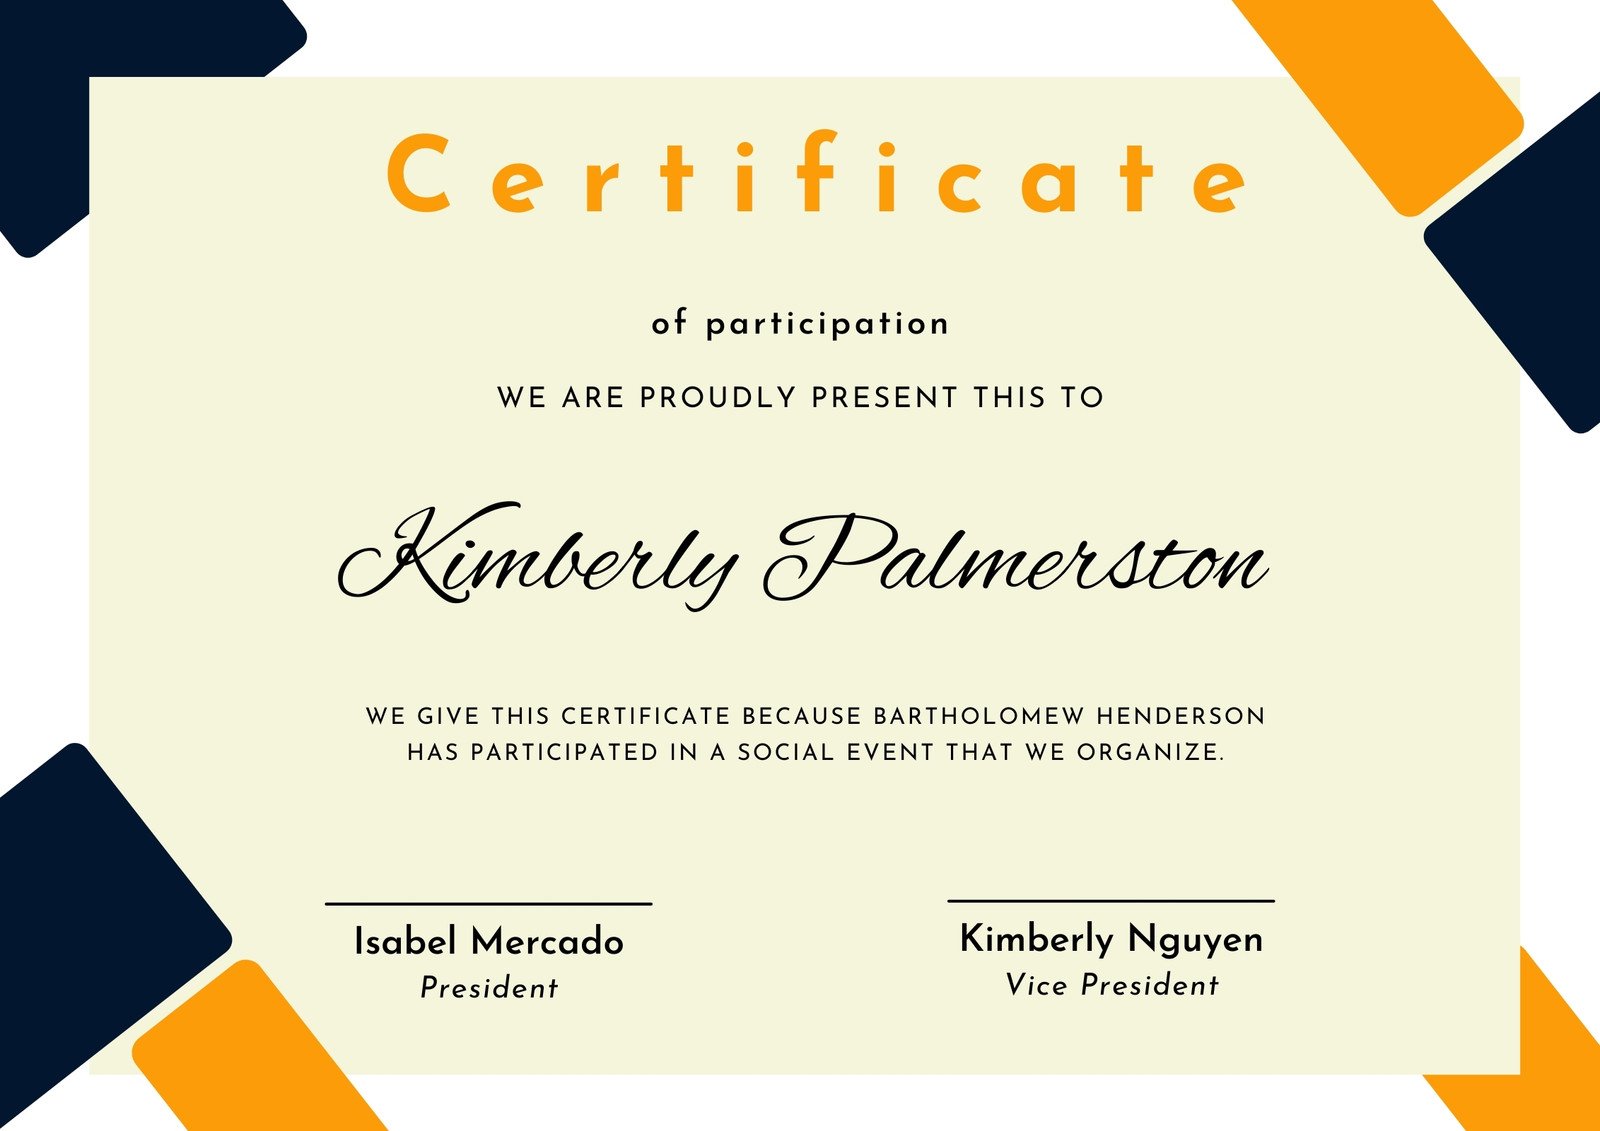 Perfect Attendance Certificate Template Free